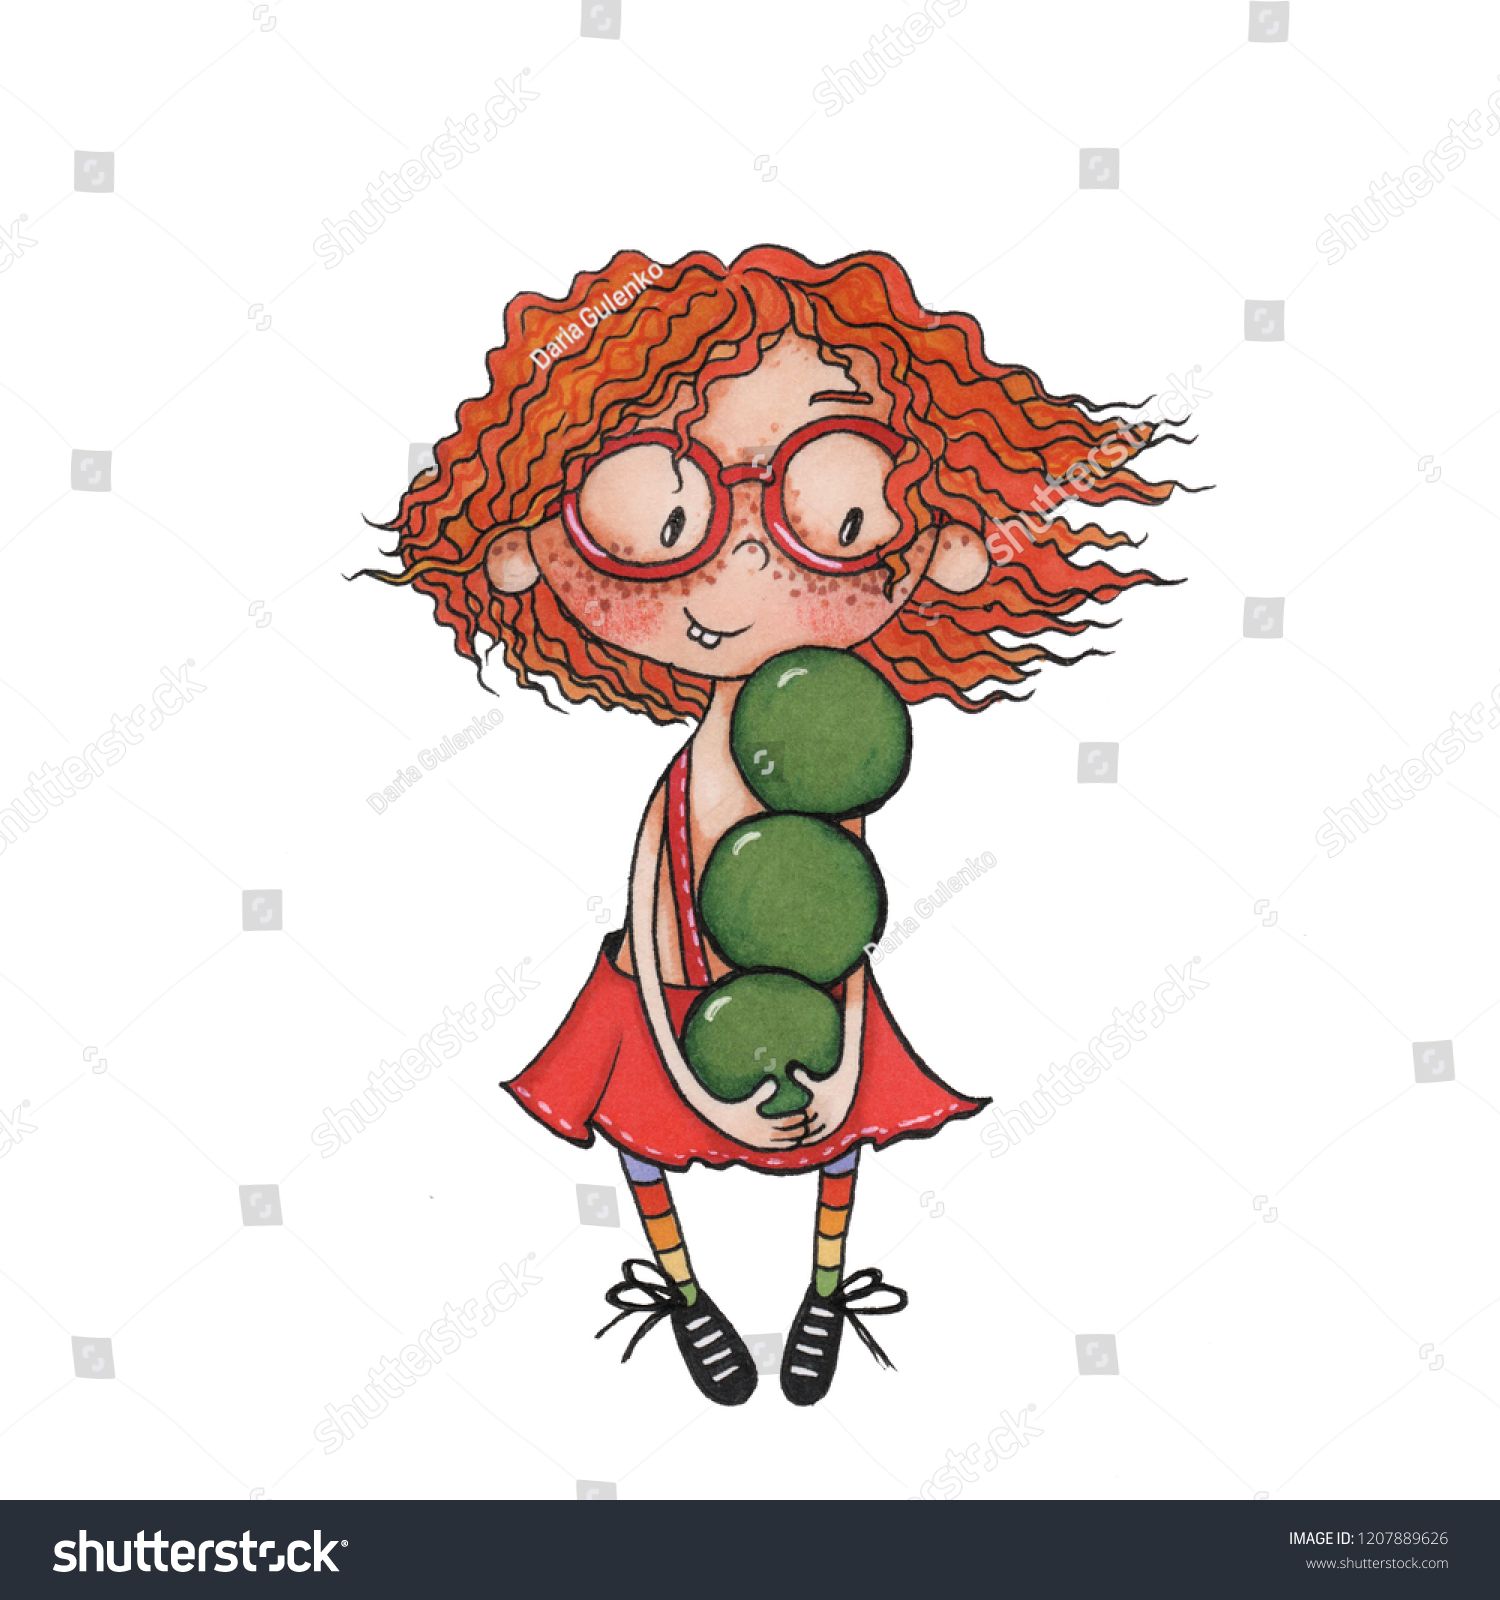 Featured image of post Cartoon Characters With Curly Hair And Glasses The woman has blue hair and a pink blouse large purple round glasses